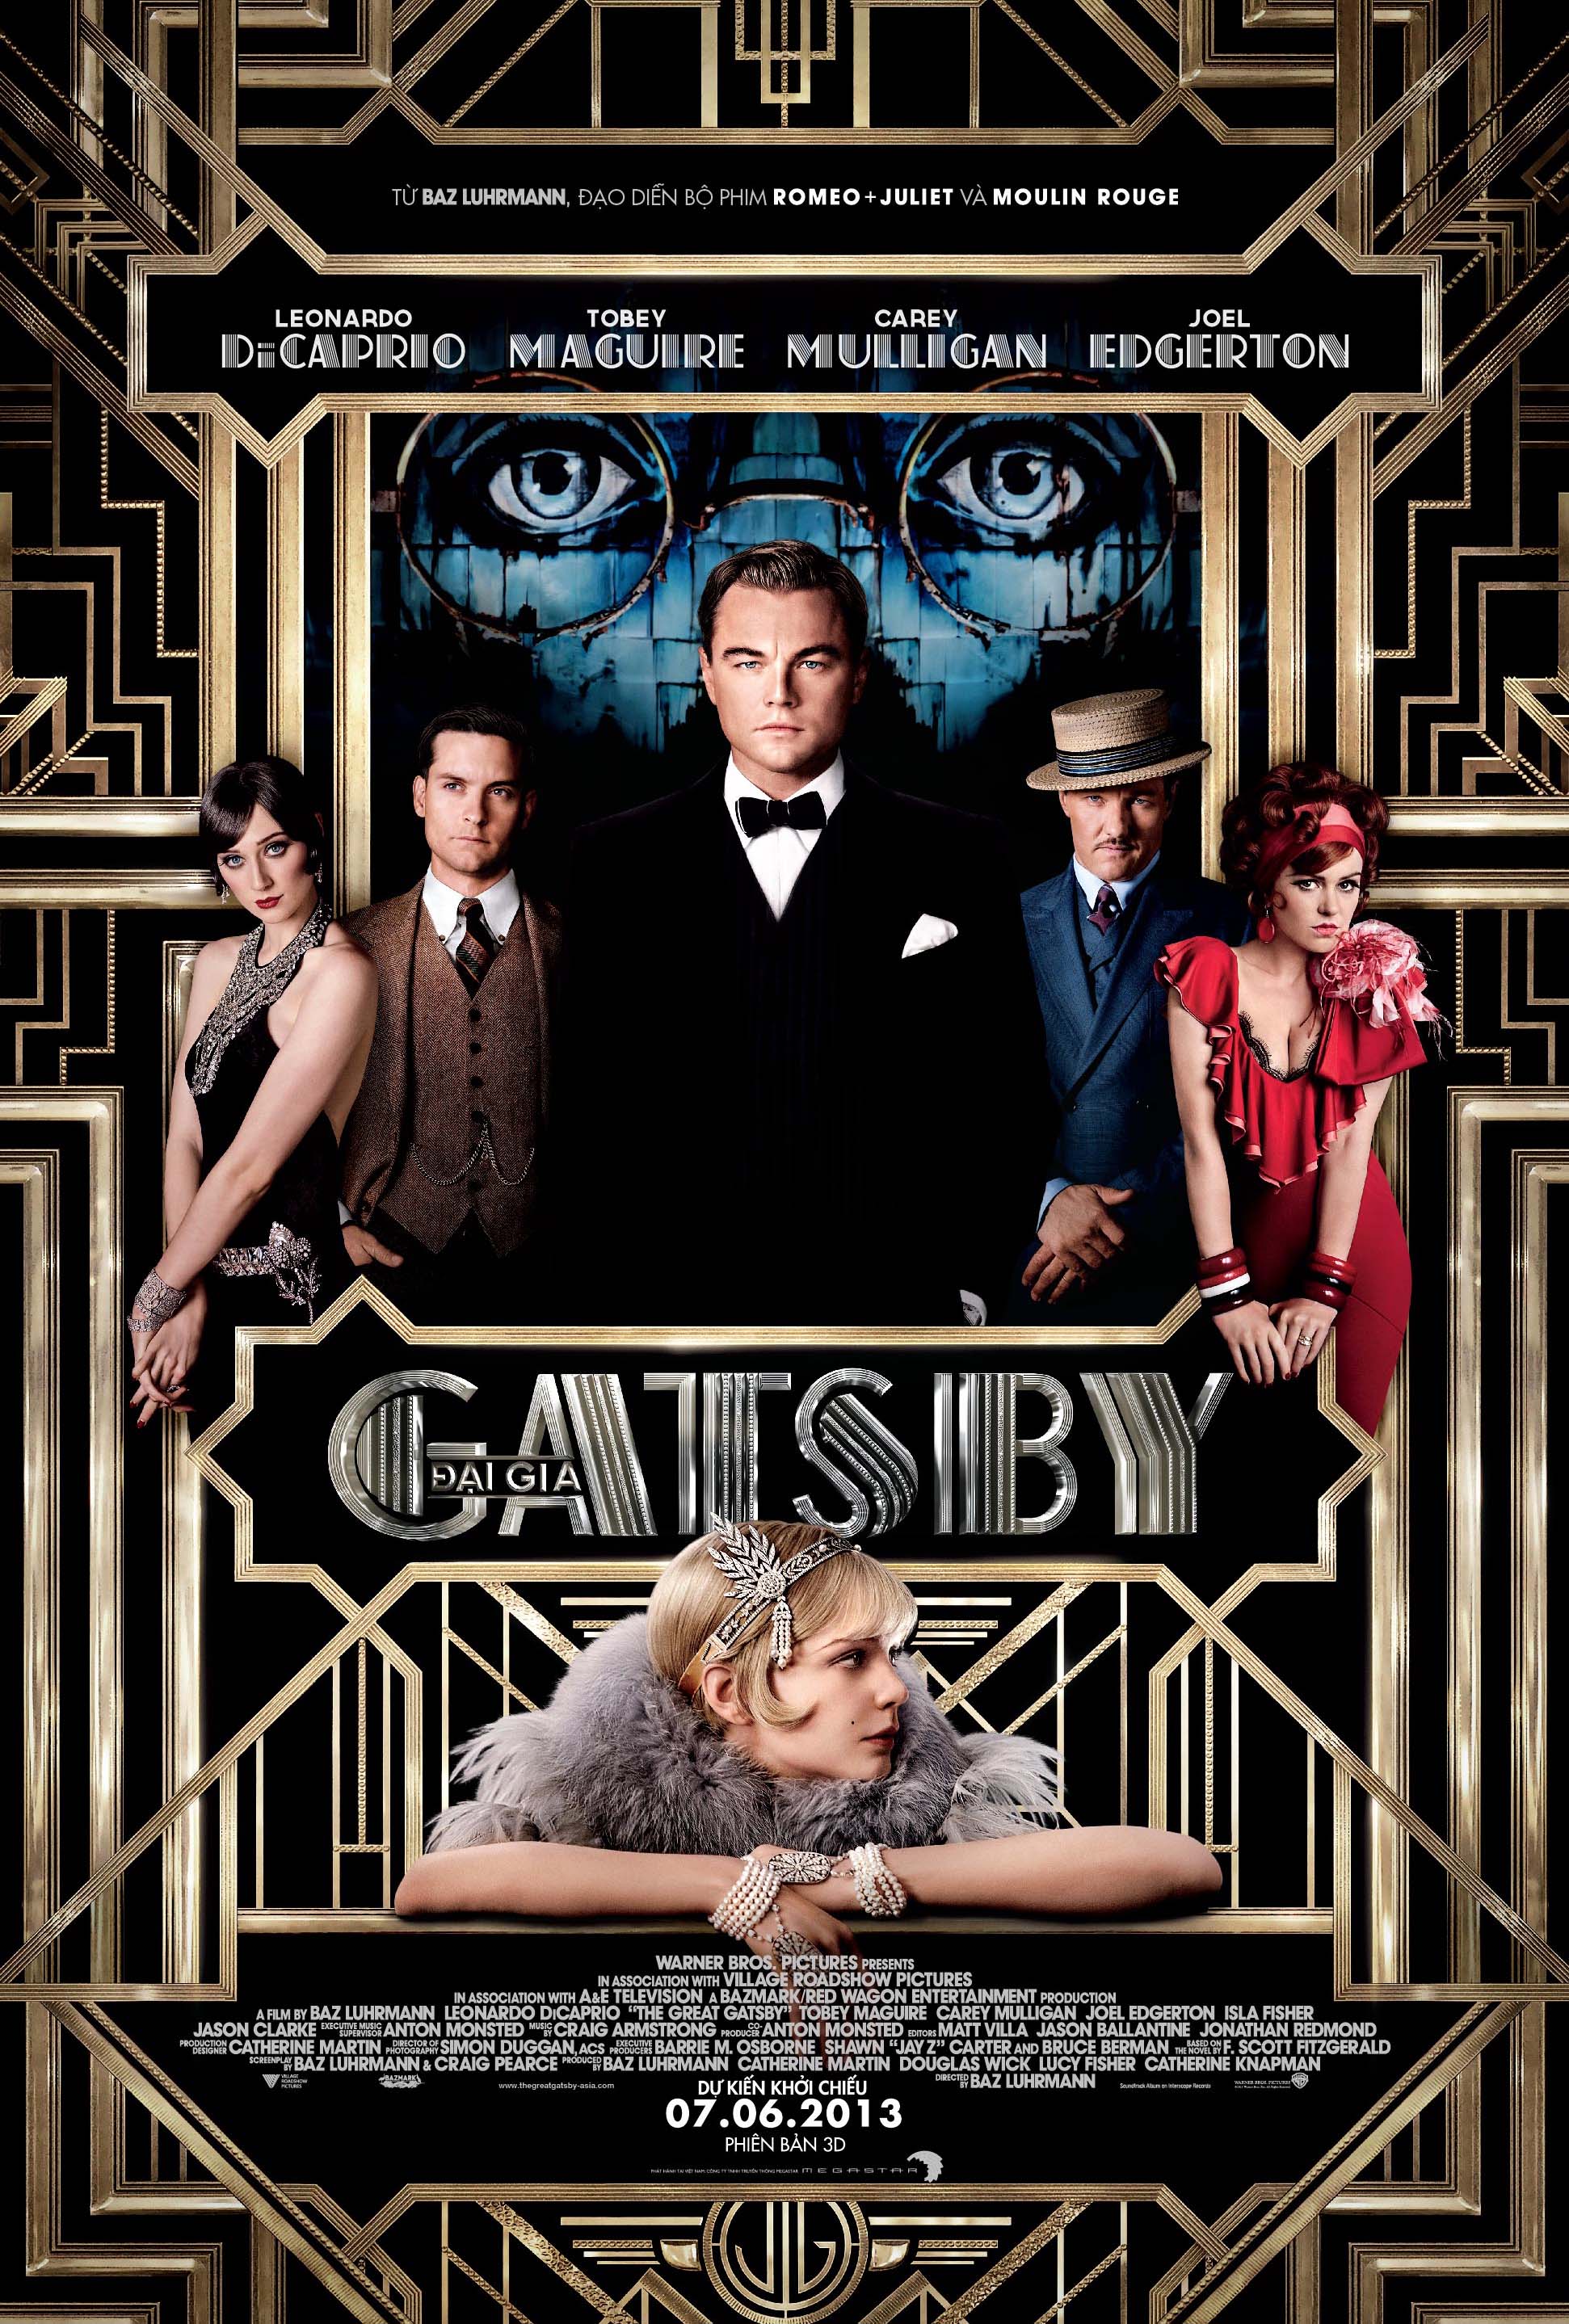 “Gatsby” soundtrack engages audiences with a modern take